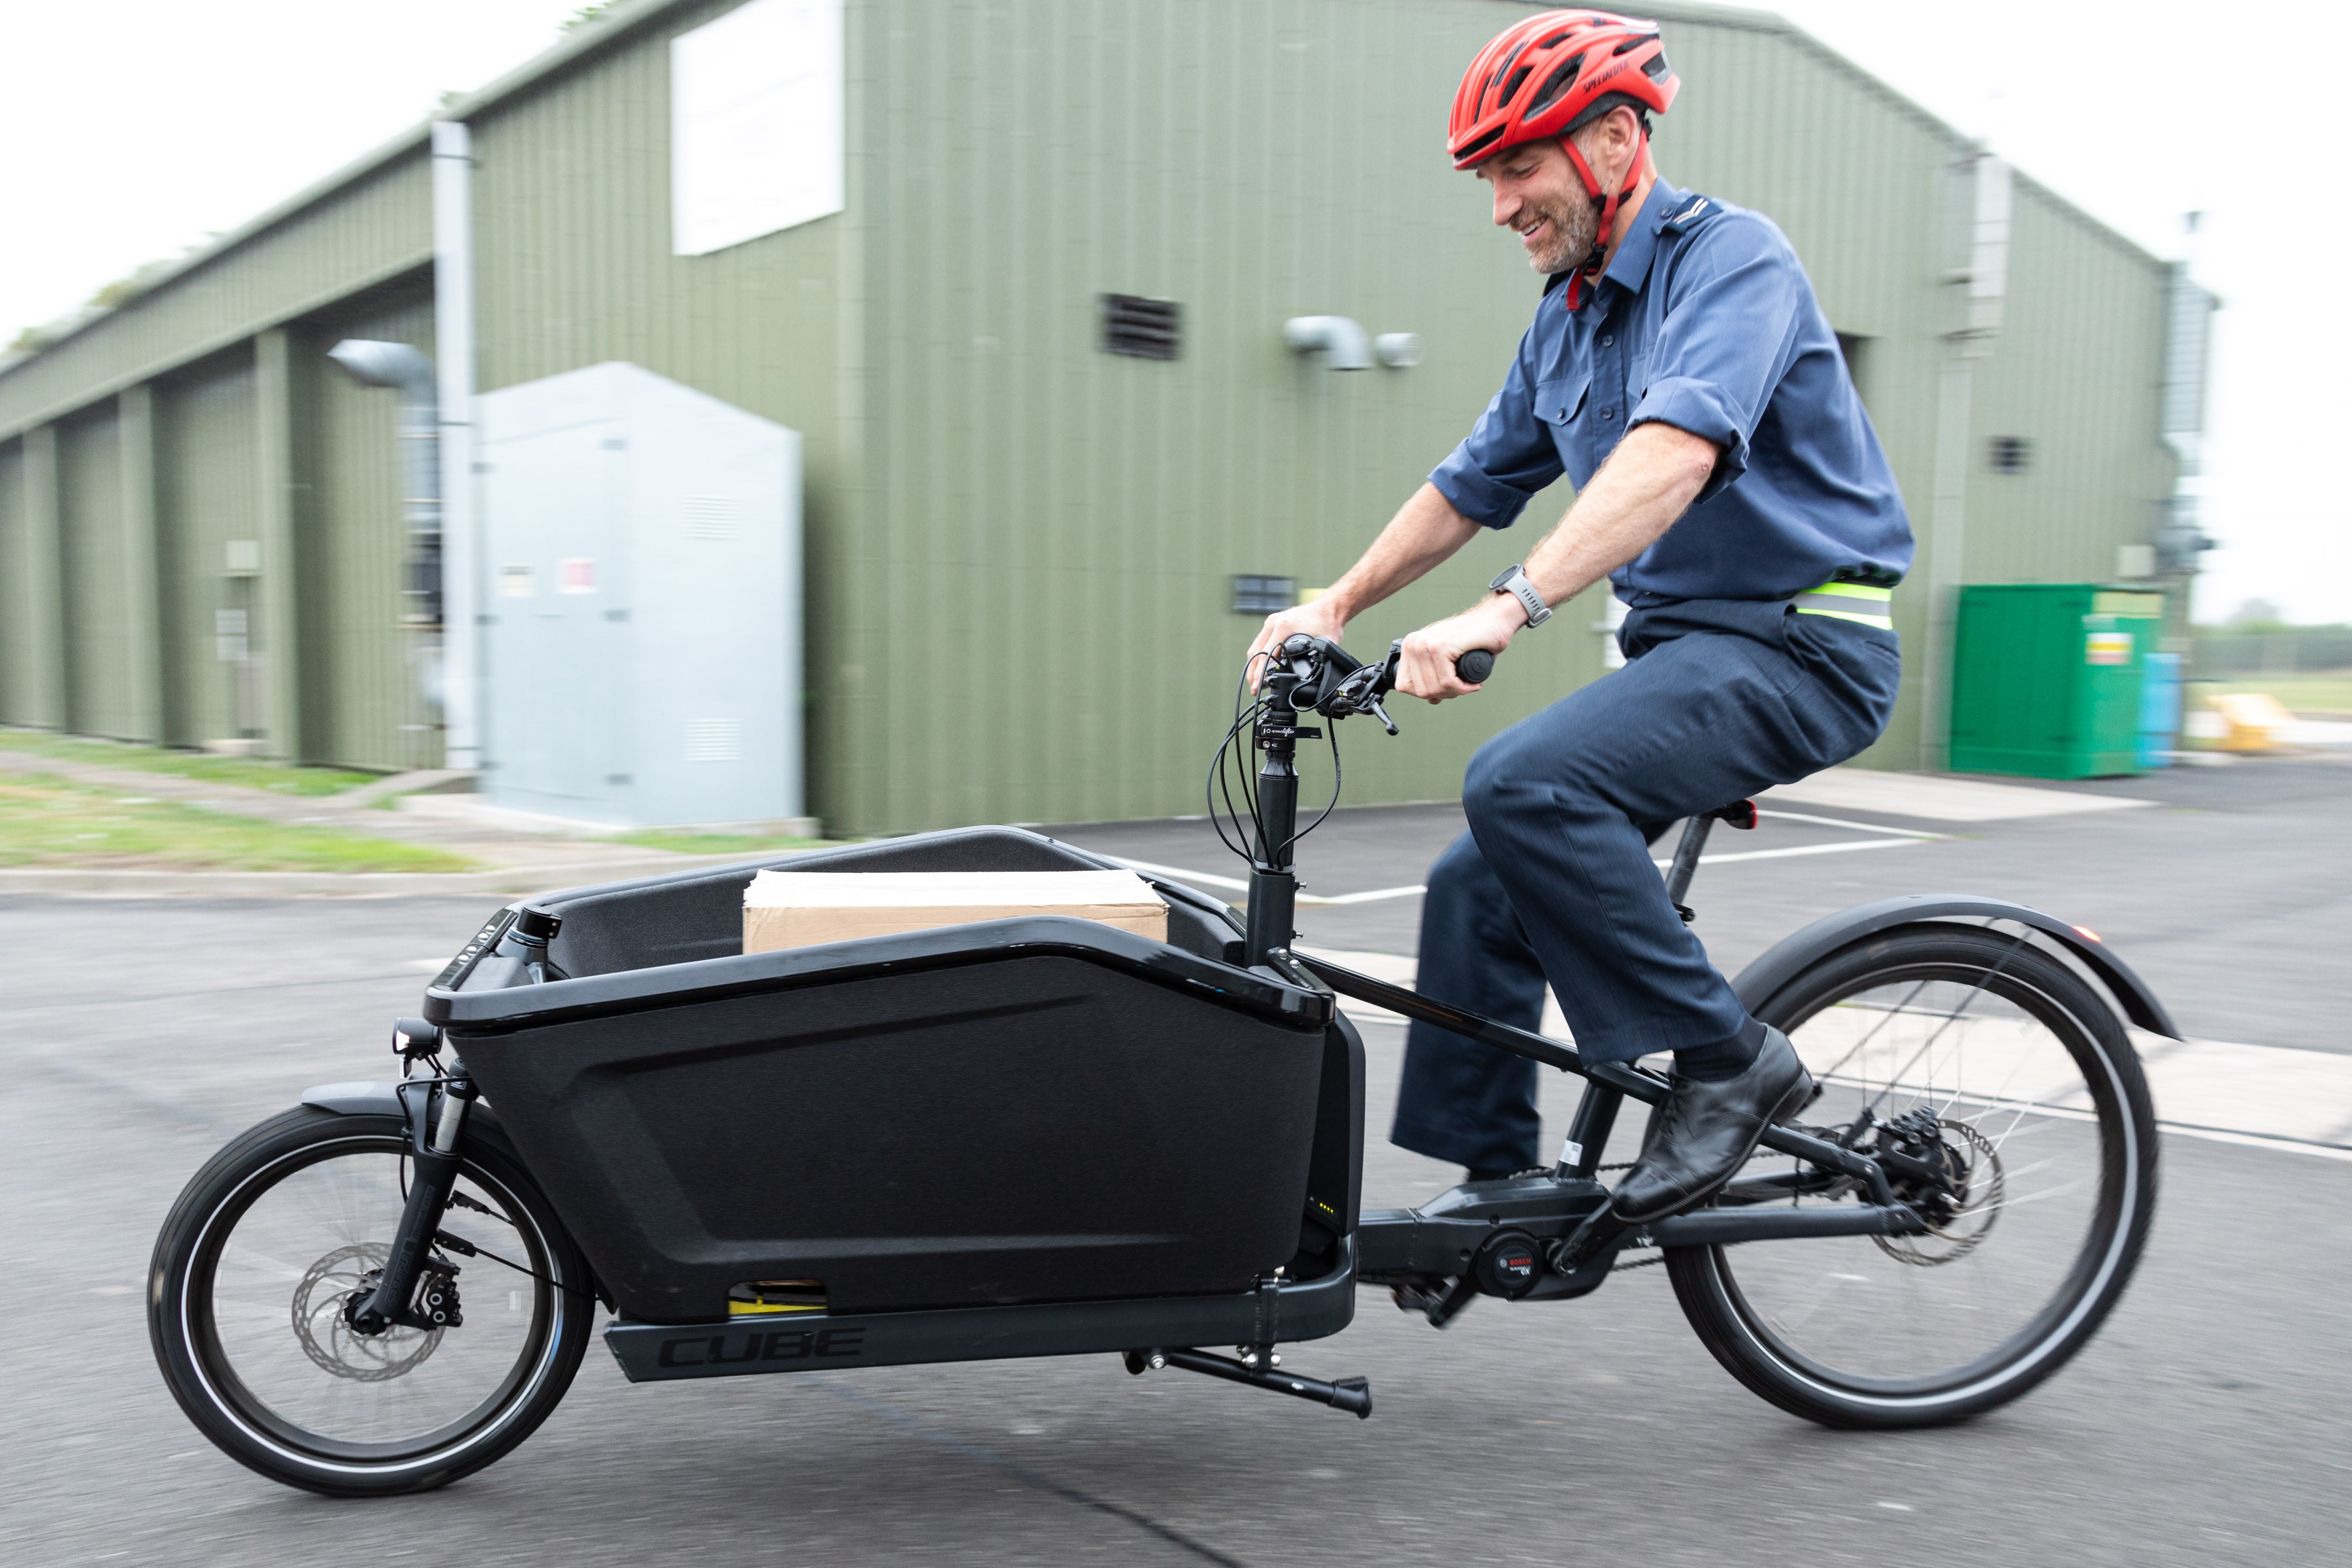 Image shows aviator riding an electric bicycle,.which is carrying cargo at the front. 